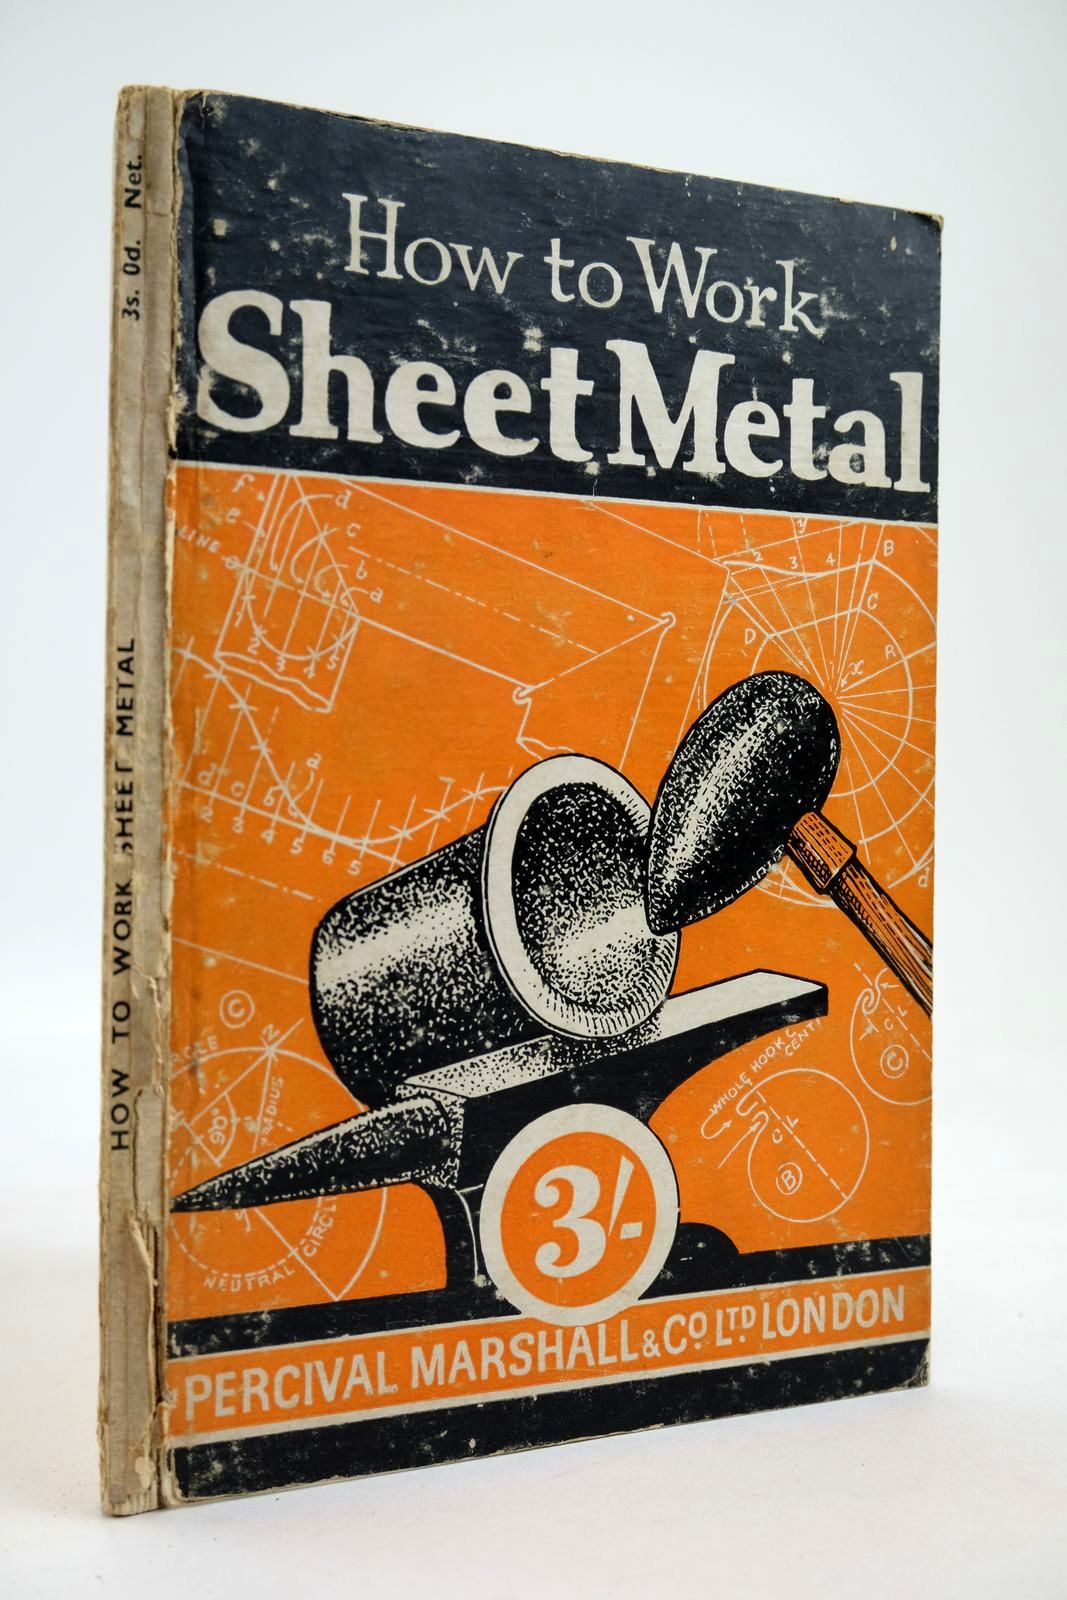 Photo of HOW TO WORK SHEET METAL written by Dyer, Herbert J. illustrated by Dyer, Herbert J. published by Percival Marshall And Co Ltd. (STOCK CODE: 2133947)  for sale by Stella & Rose's Books